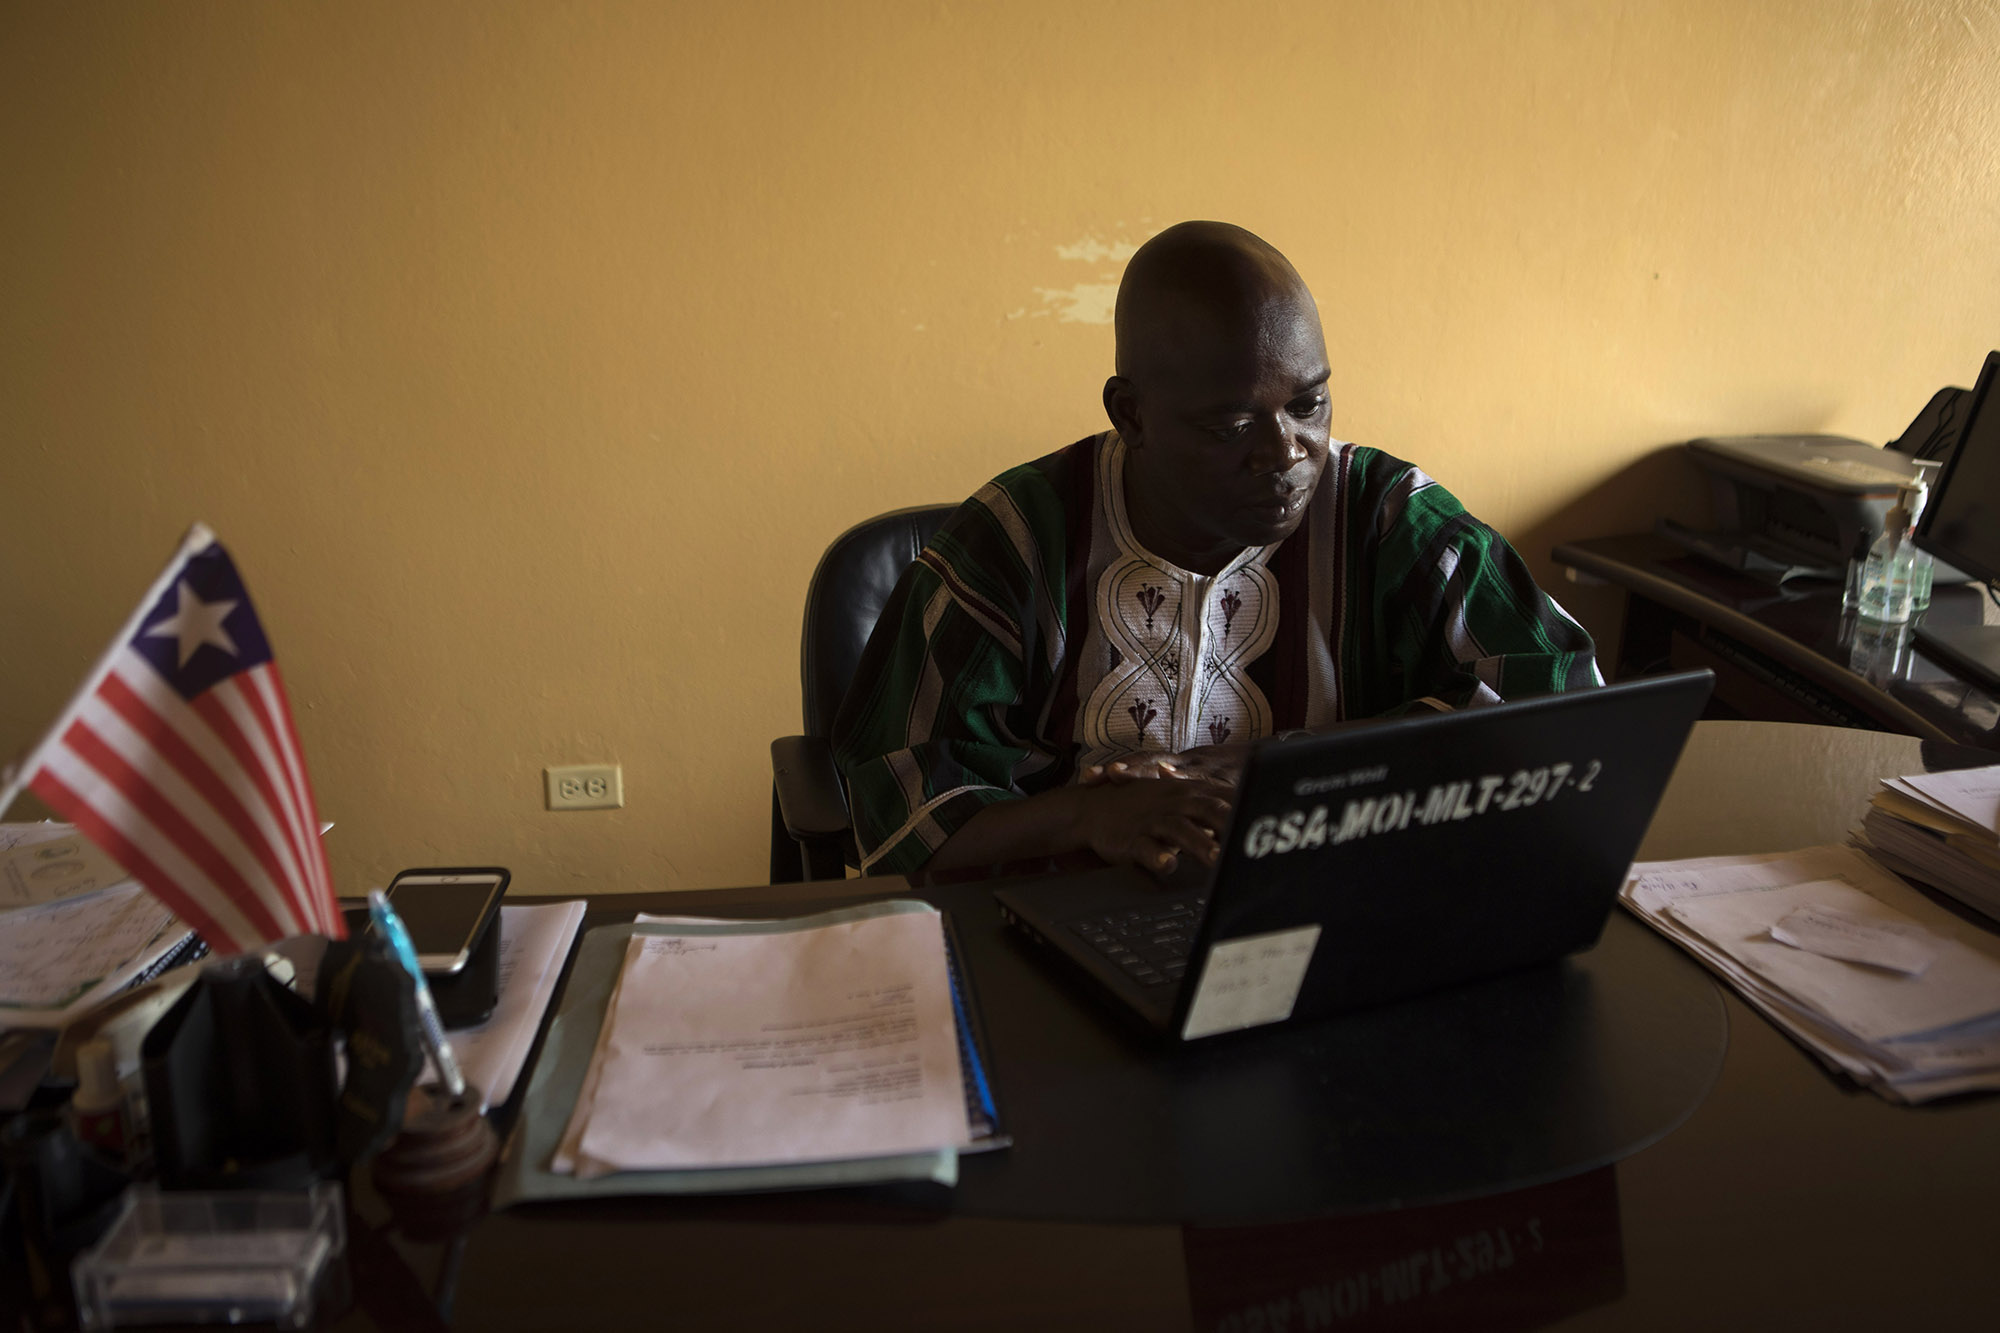  Andrew G. Temeh, Deputy Minister of Administration at the Ministry of Information (MICAT) and the OGP Focal Person, works at his desk. Minister Temeh is working with OGP to create better transparency and accountability in the government. Liberia joi